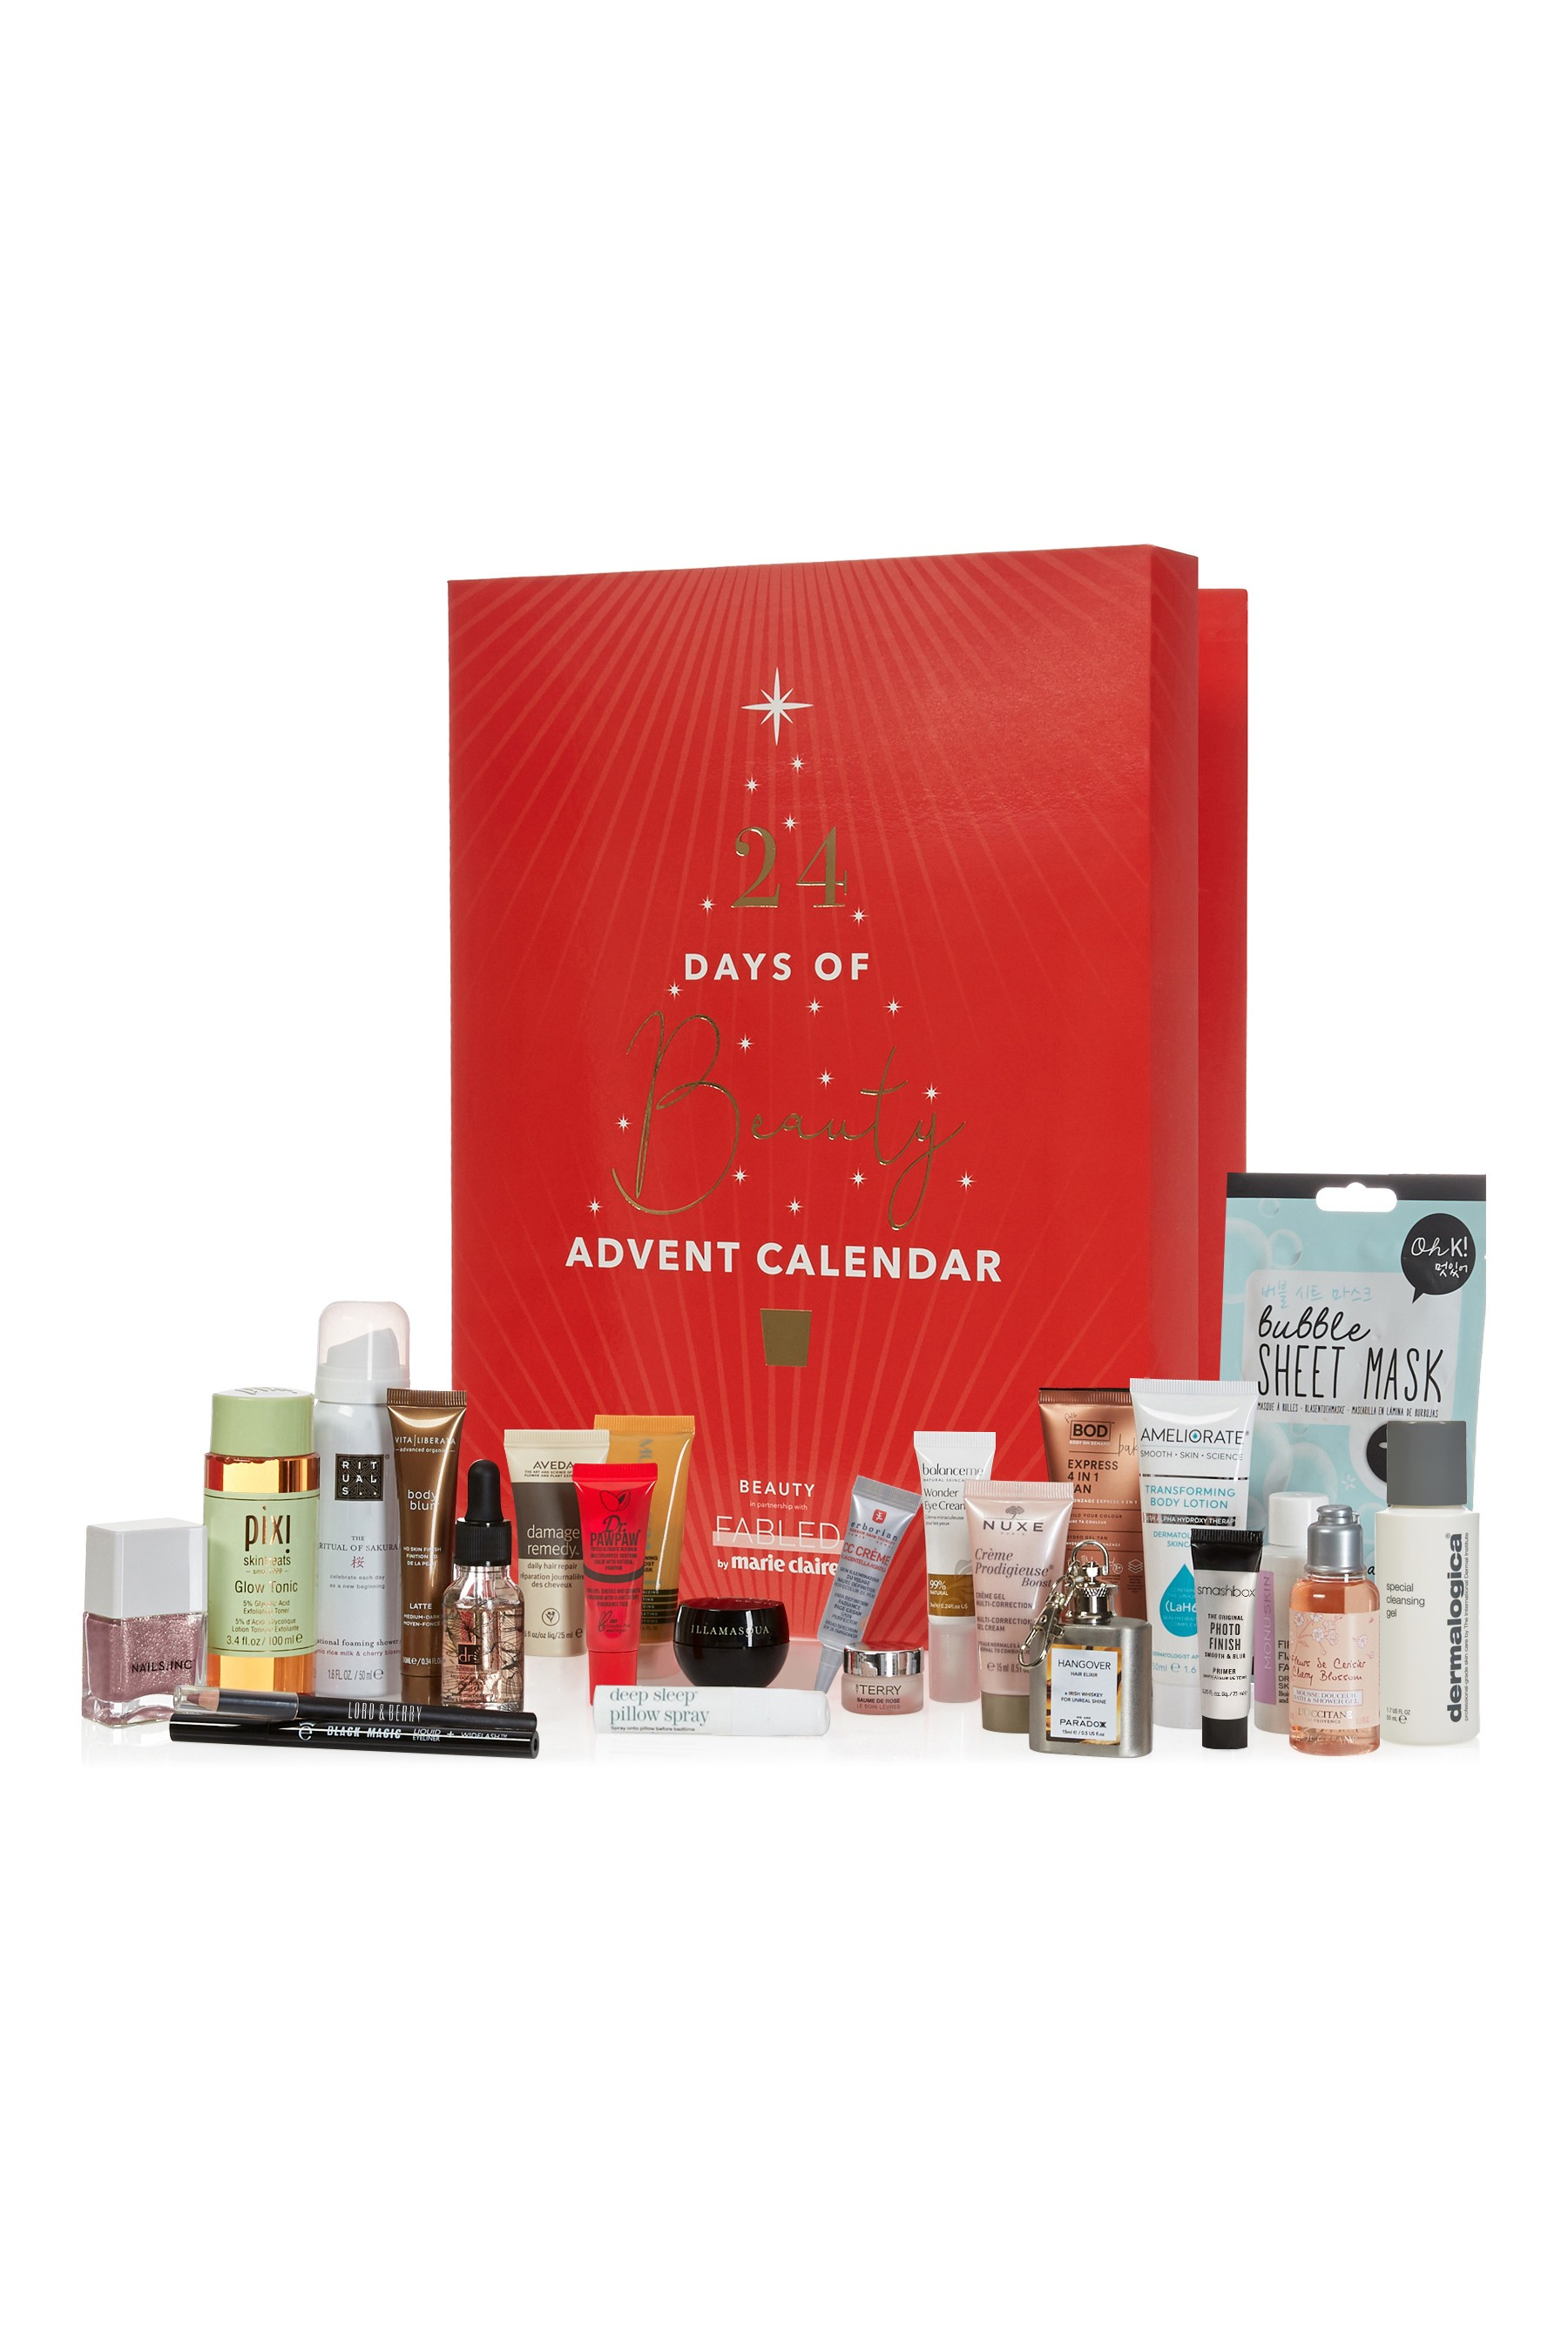 Beauty Advent Calendars 2019 That Are In Stock And Offer The